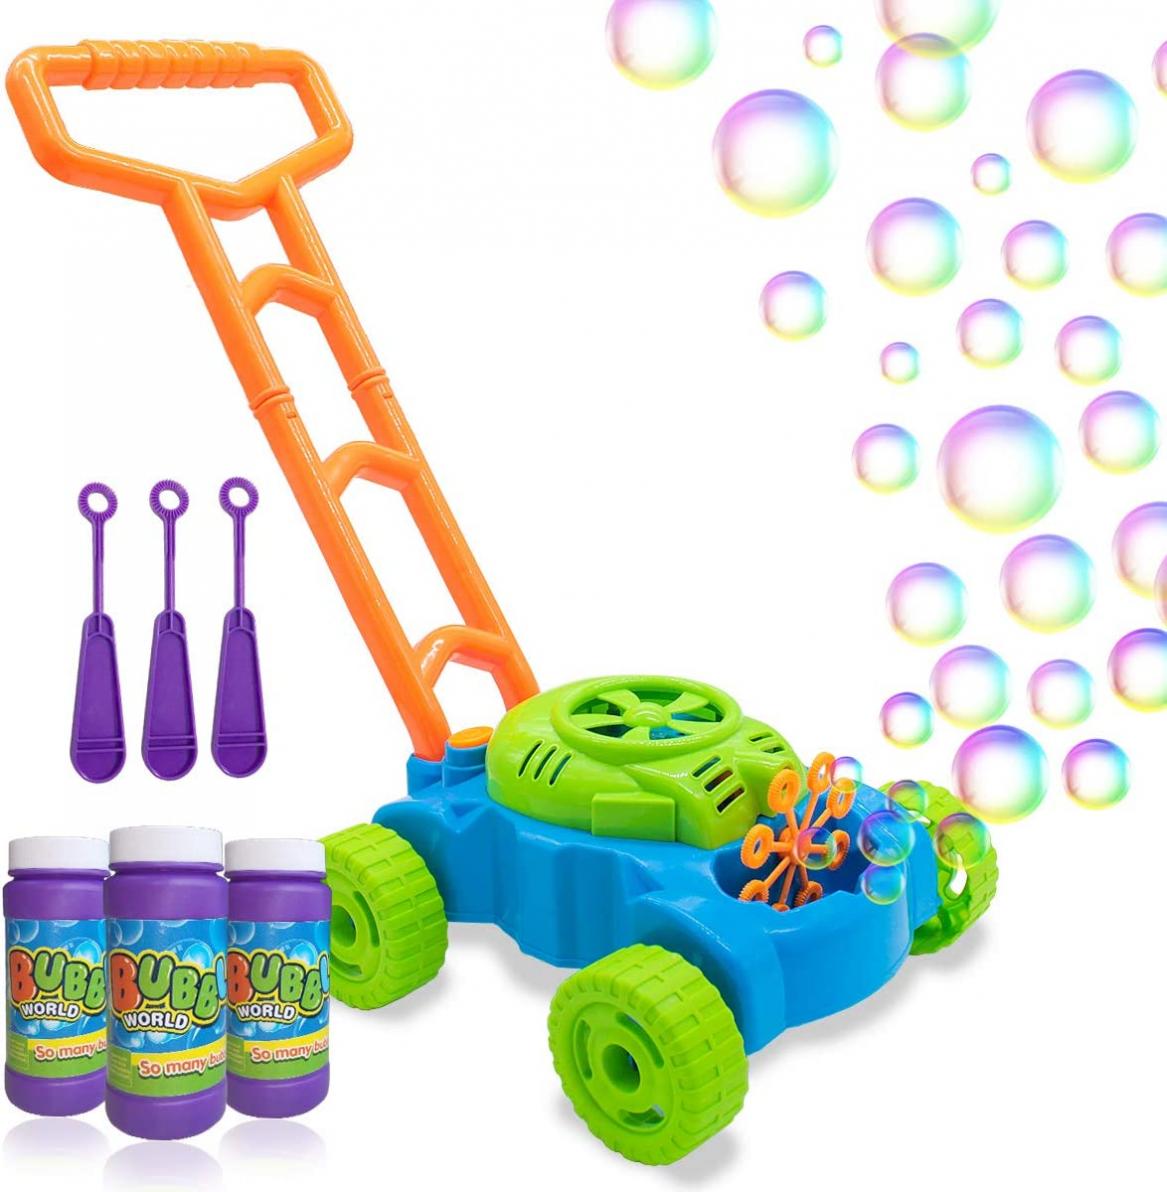 Lydaz Bubble Lawn Mower for Toddlers, Kids Bubble Blower Maker Machine, Summer Outdoor Push Toys, Christmas Birthday Gifts Easter Basket Stuffers Toys for Preschool Baby Boys Girls